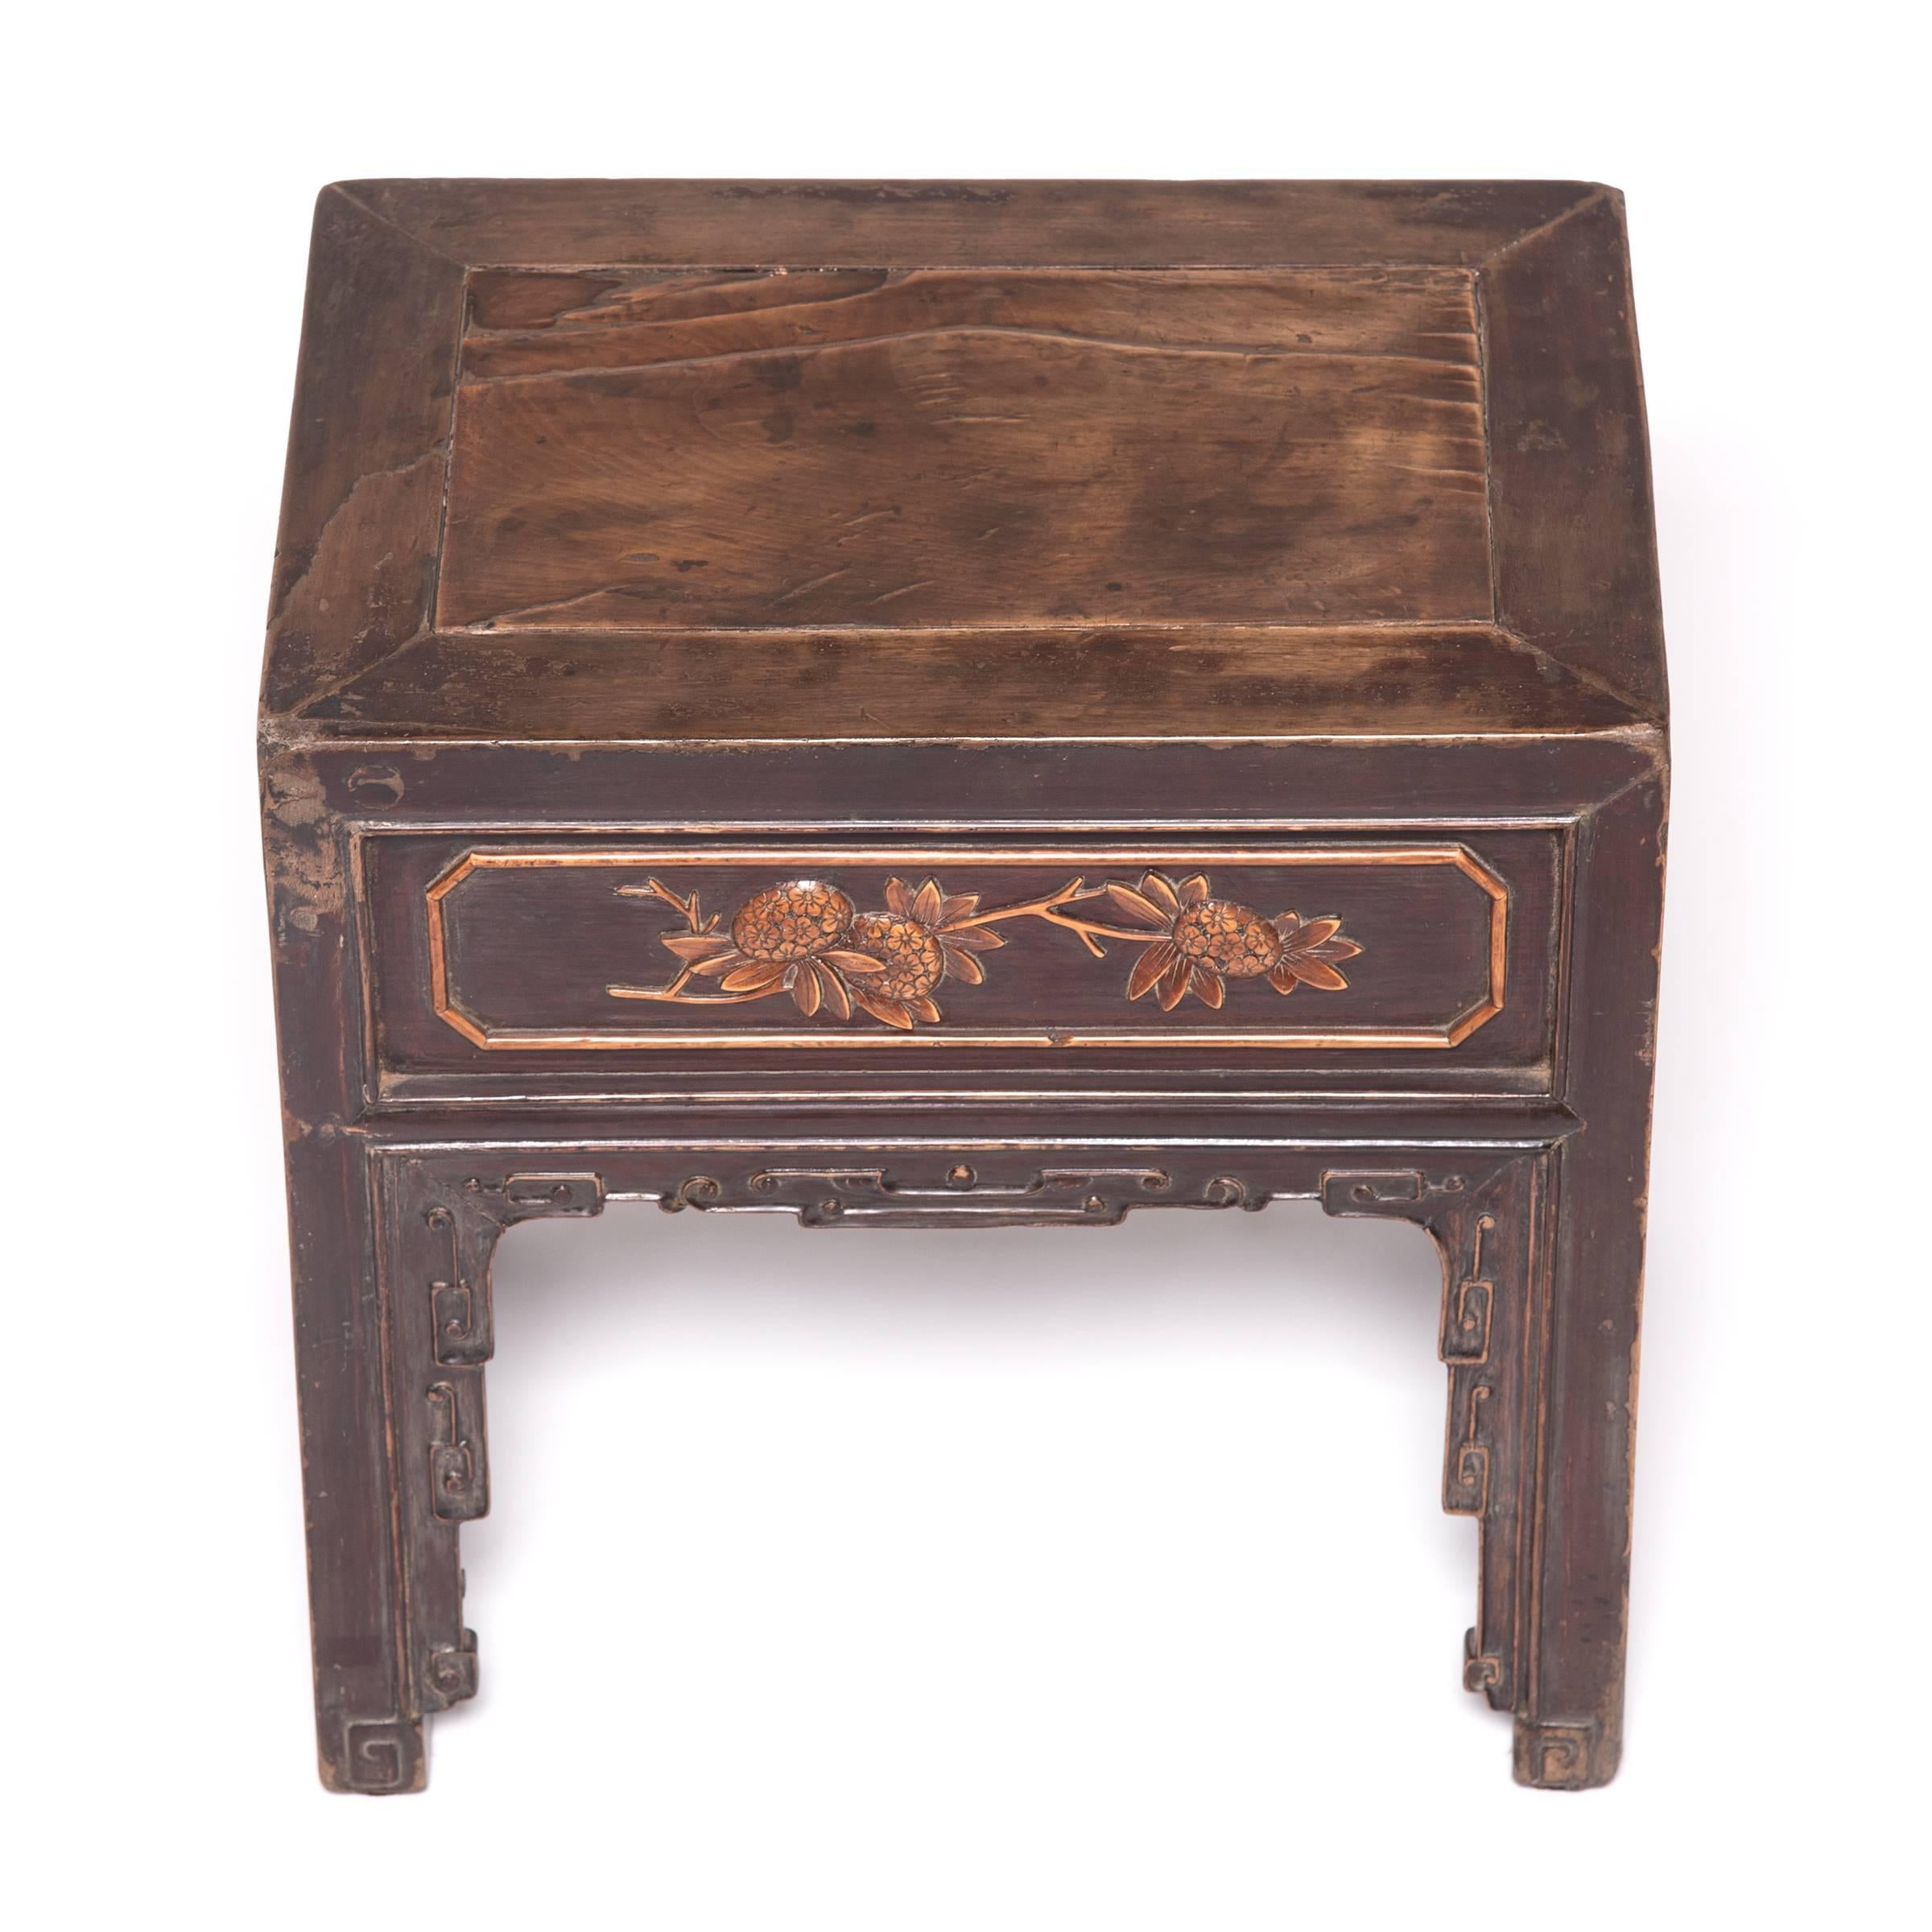 19th Century Petite Chinese Display Table with Boxwood Inlay, c. 1850